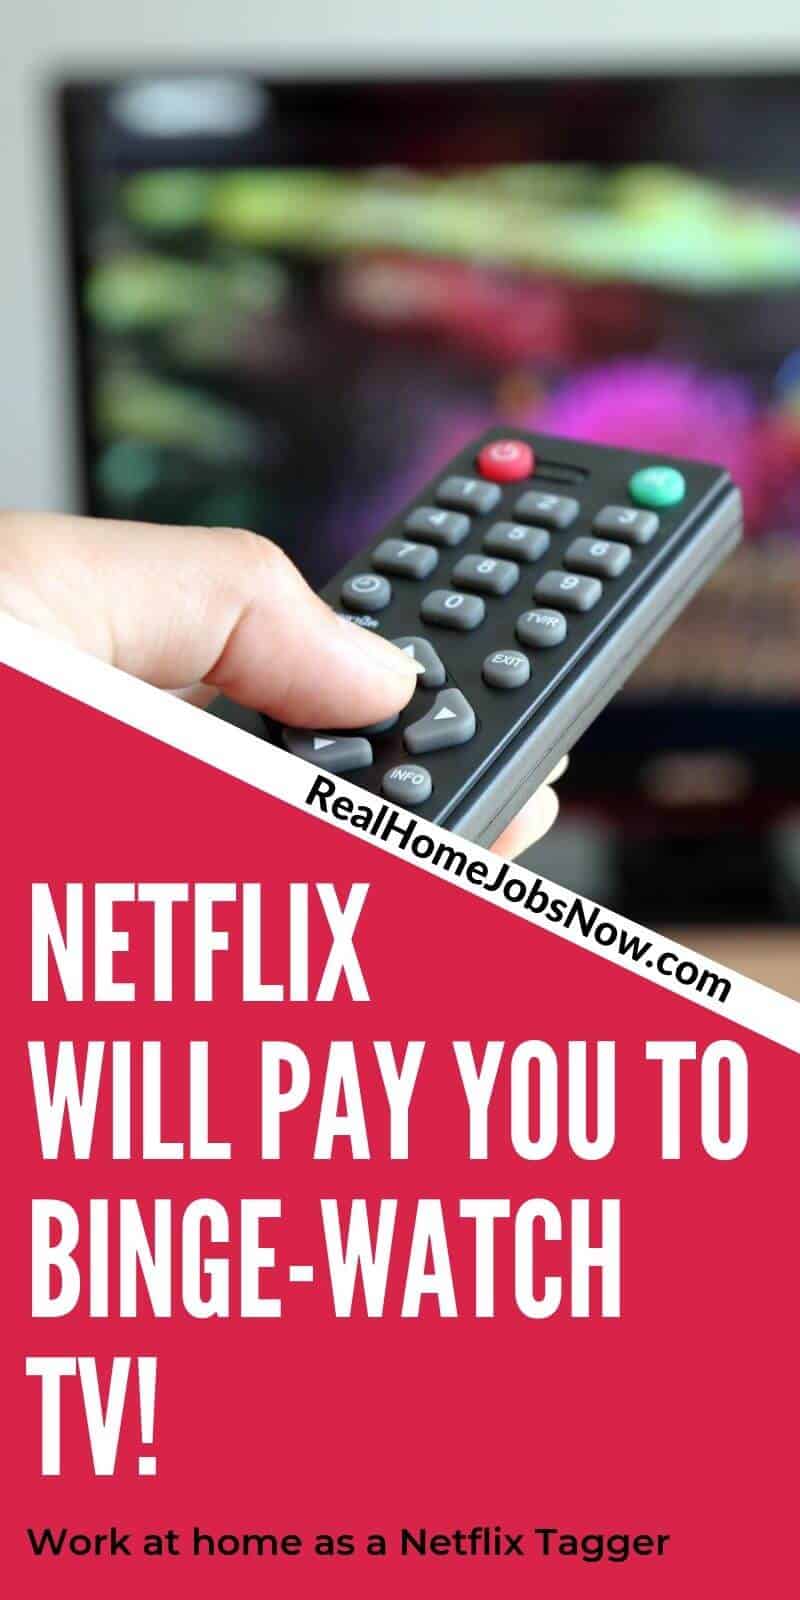 Who wouldn't want to get paid to watch TV from the comfort of home? As a Netflix Tagger, you can do exactly that! #makemoneyonlinefree #earnmoneyfromhome #onlinejobsfromhome #makemoneyideas #earnextracash #workfromhomejobs #workathomejobs